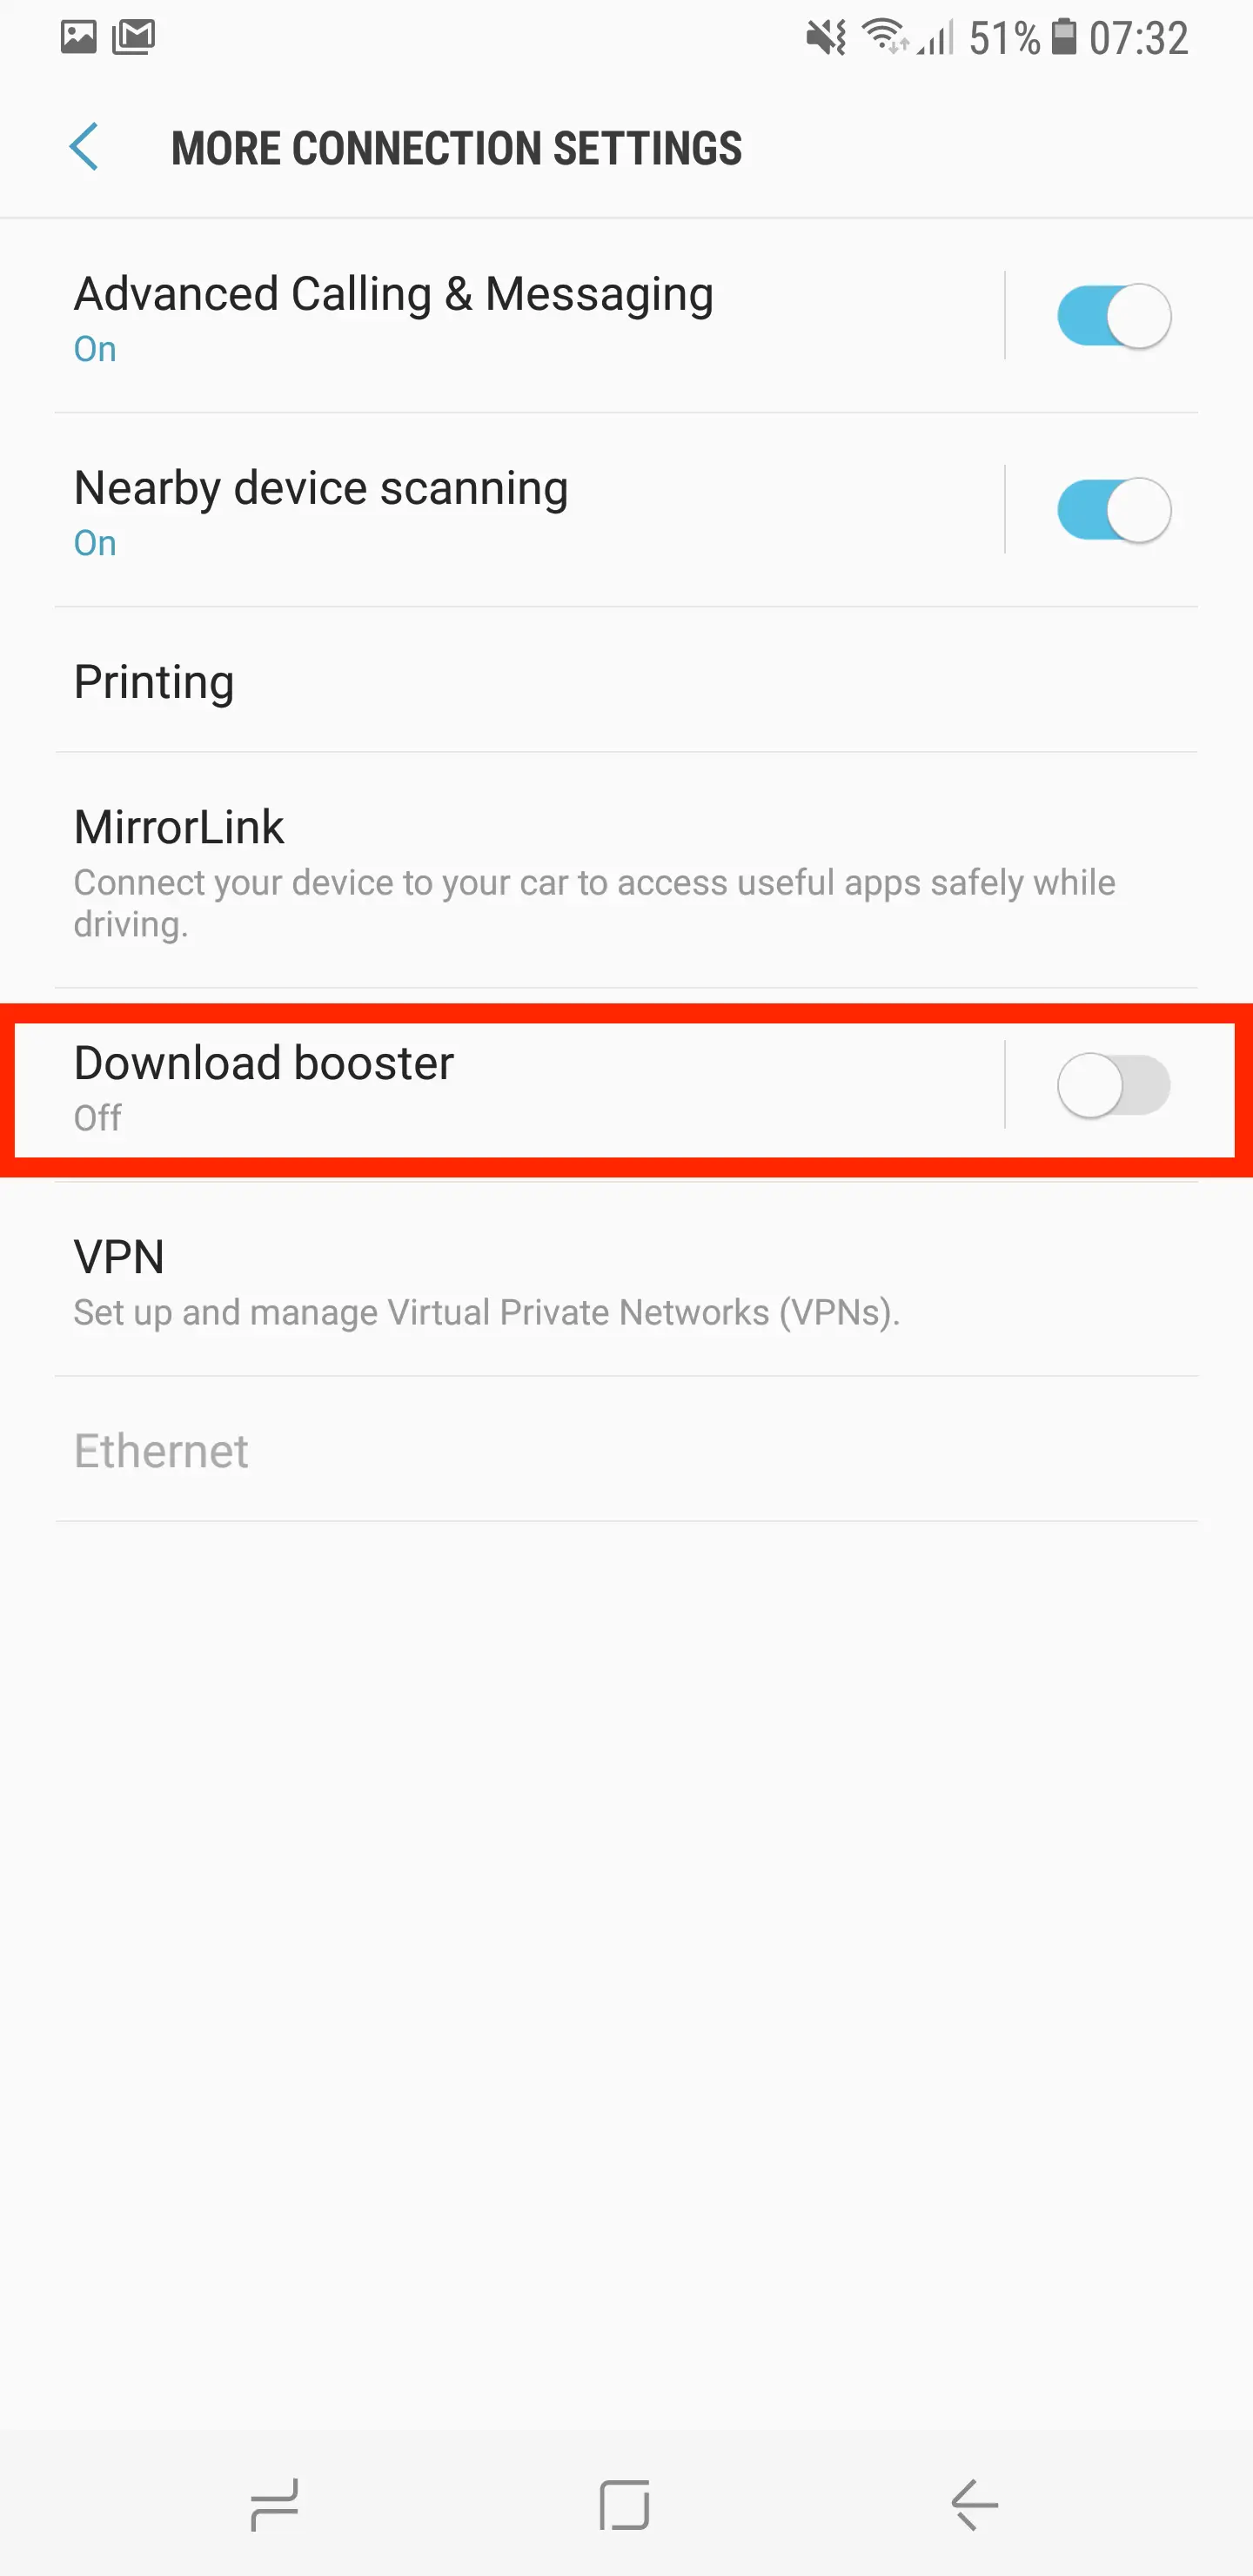 How to turn on Download Booster in Samsung Galaxy S10+